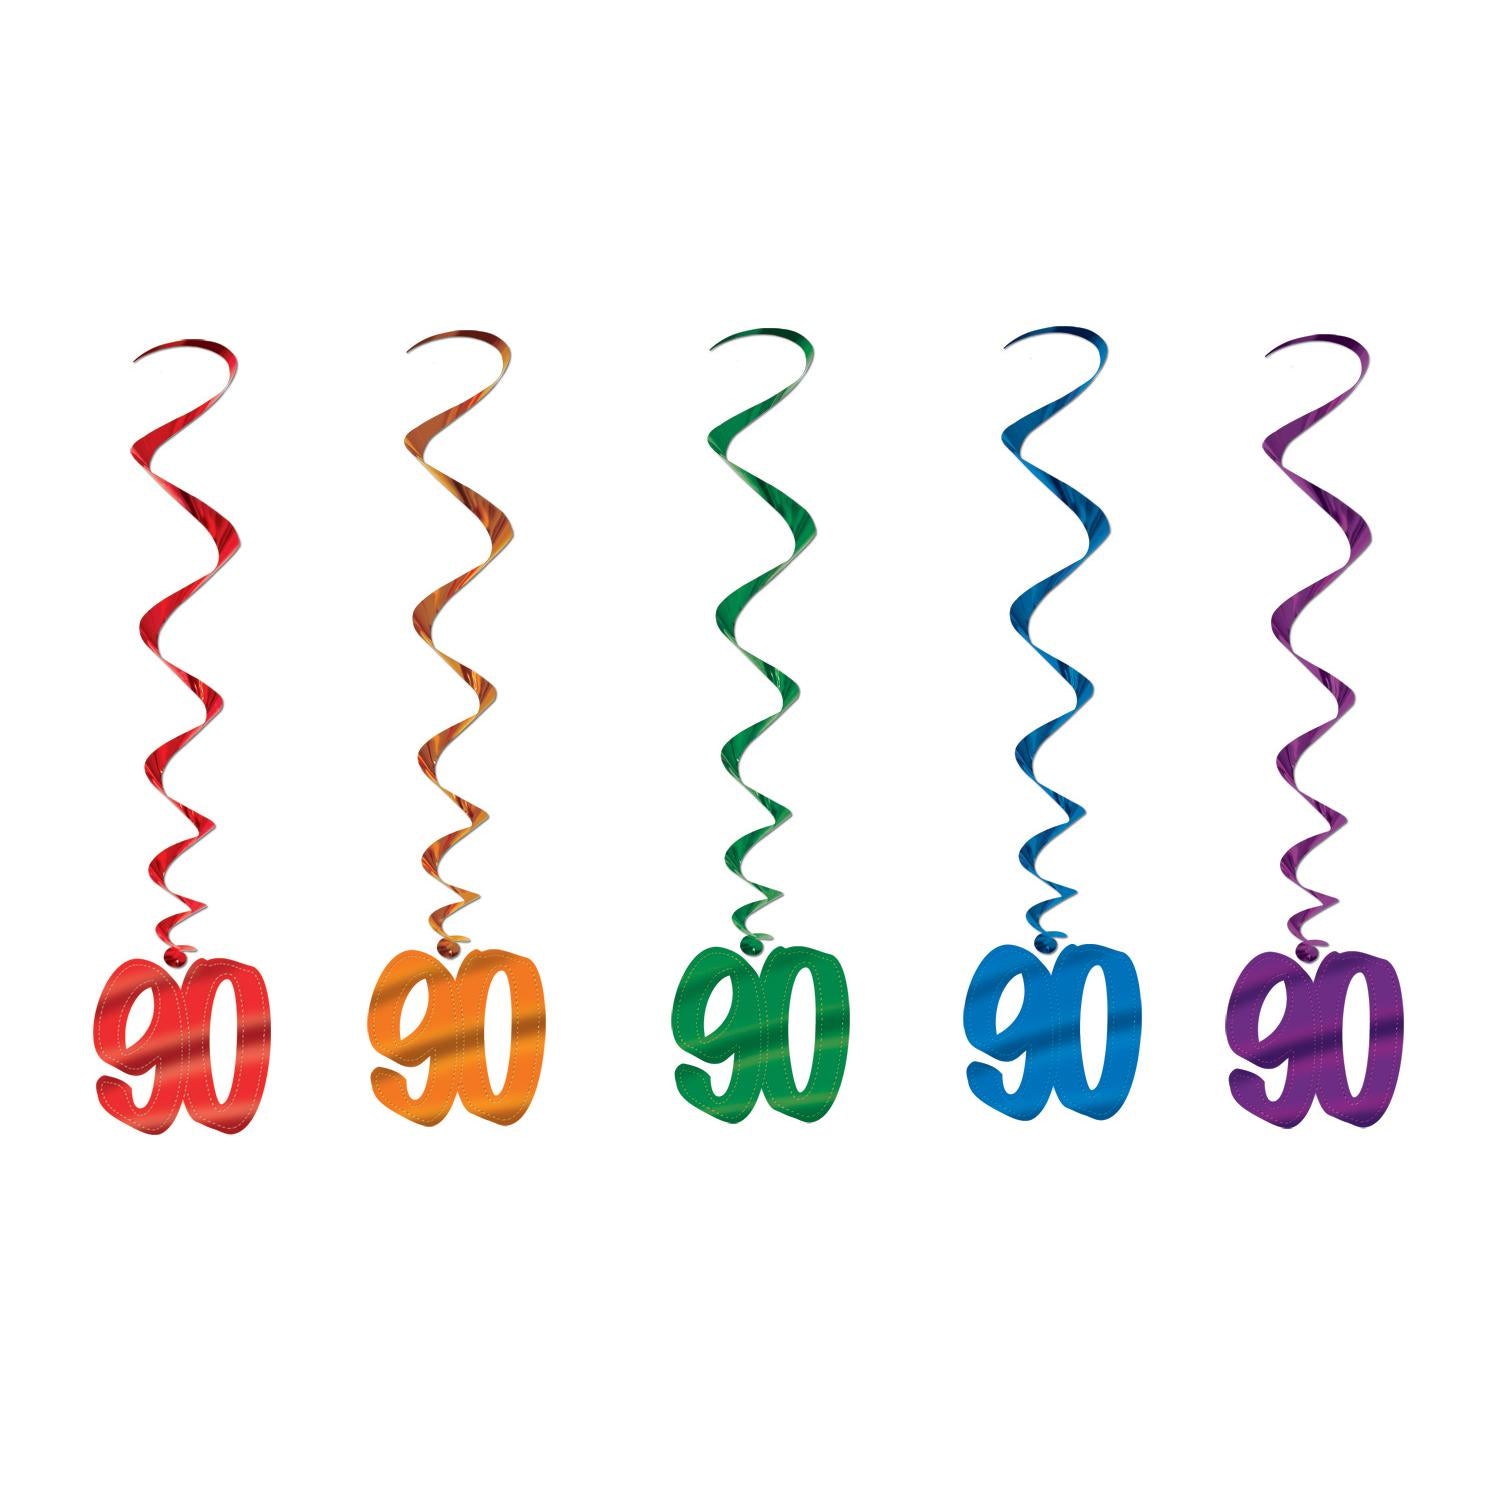 Beistle 90th Birthday Party Whirls - Assorted colors (5/Pkg)